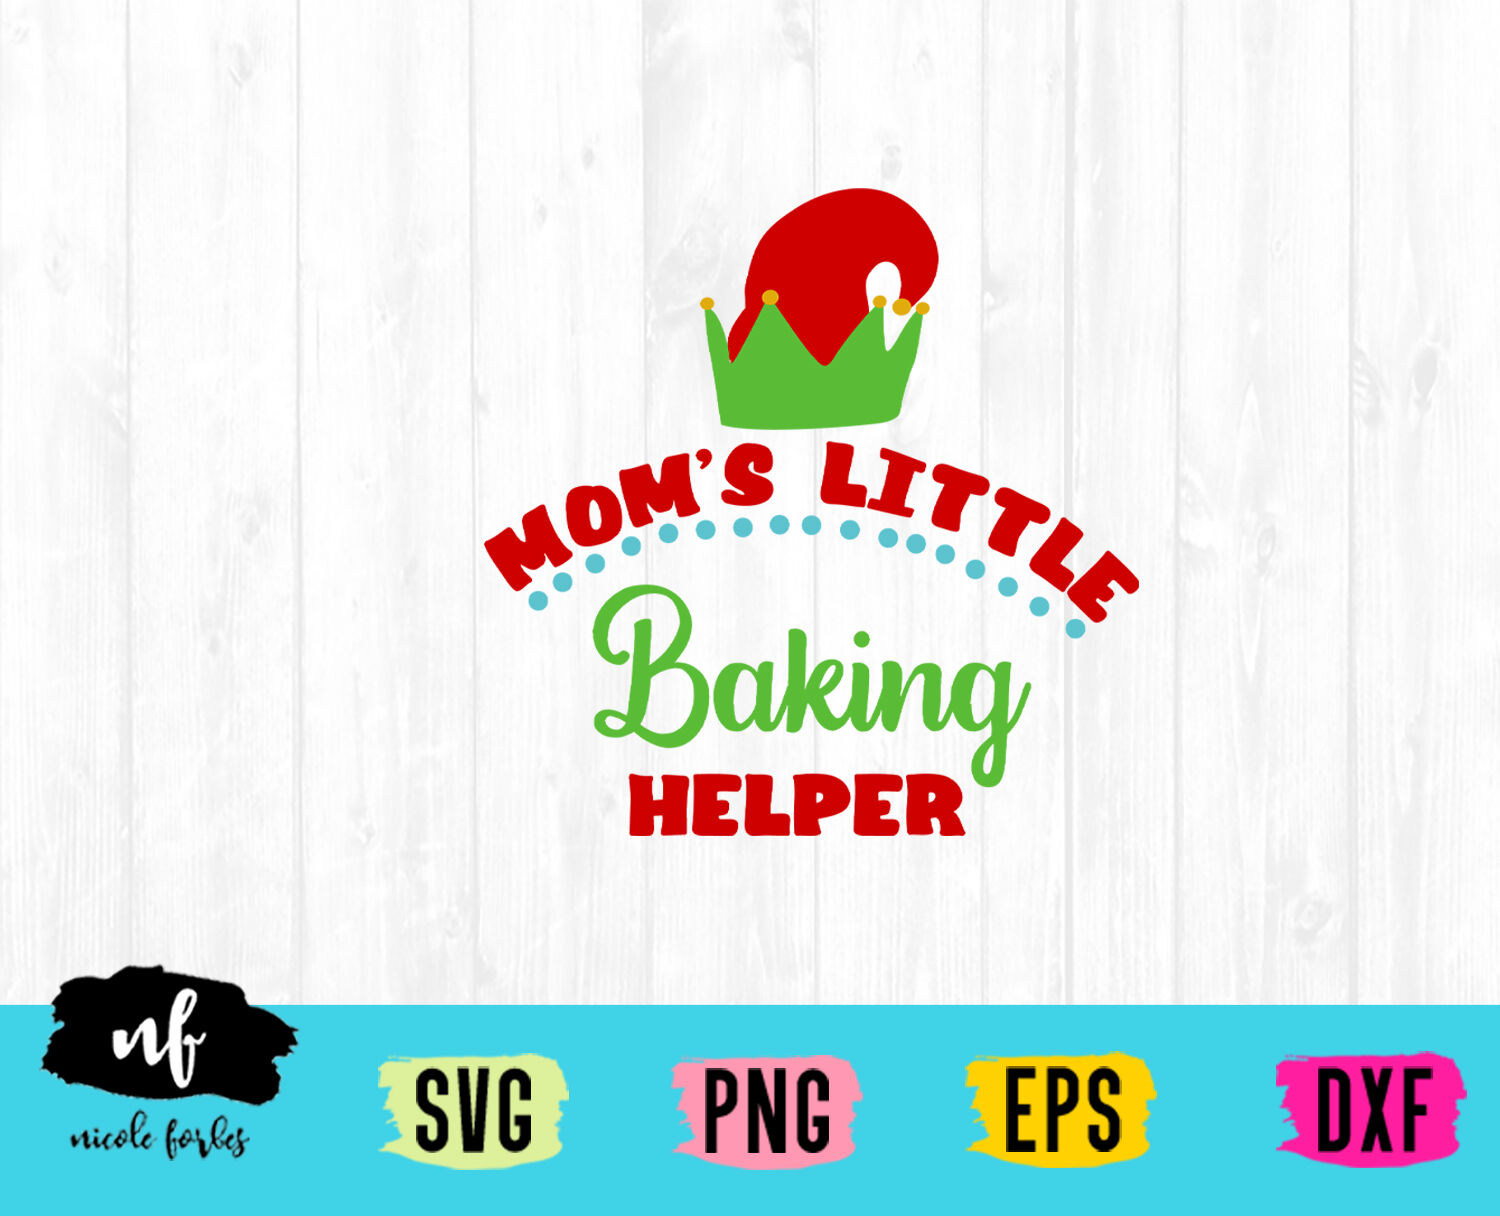 Christmas Baking Svg Cut File By Nicole Forbes Designs Thehungryjpeg Com